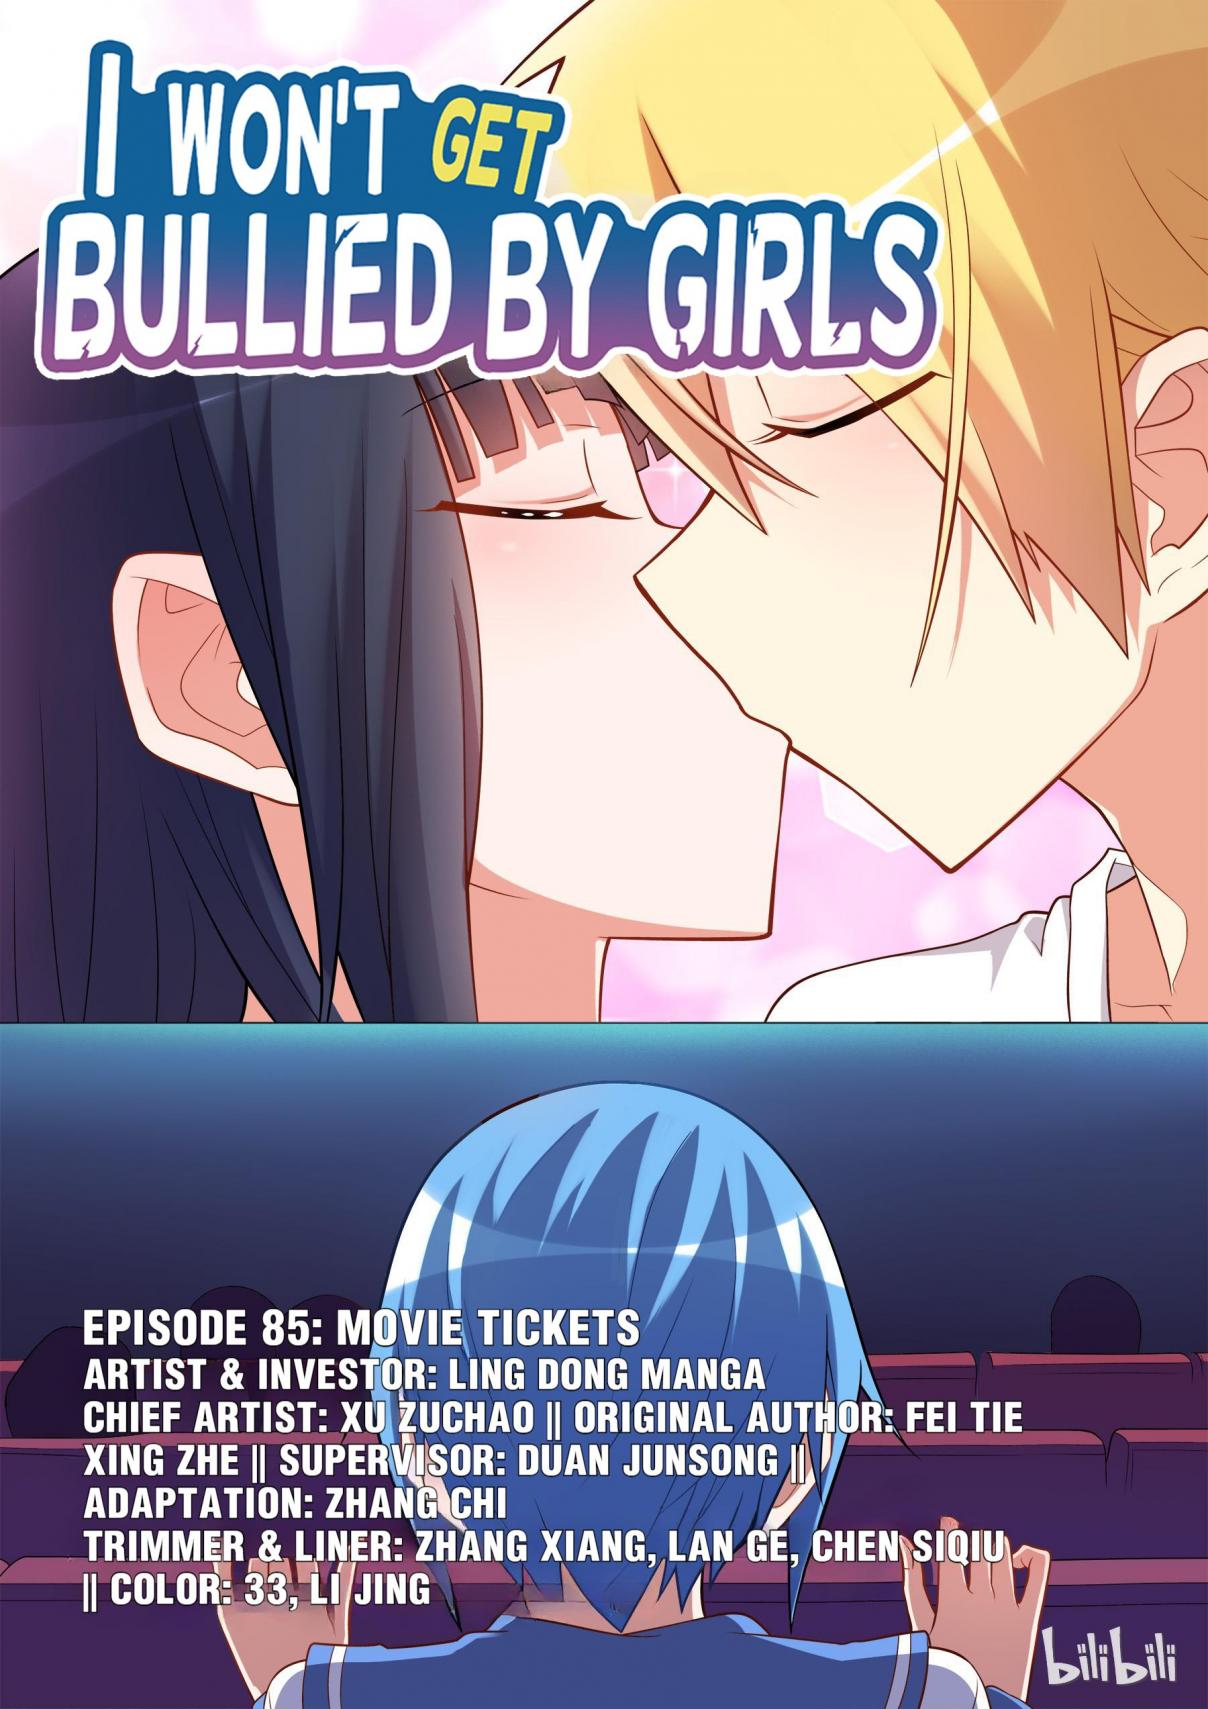 I Don't Want to Be Bullied by Girls 85